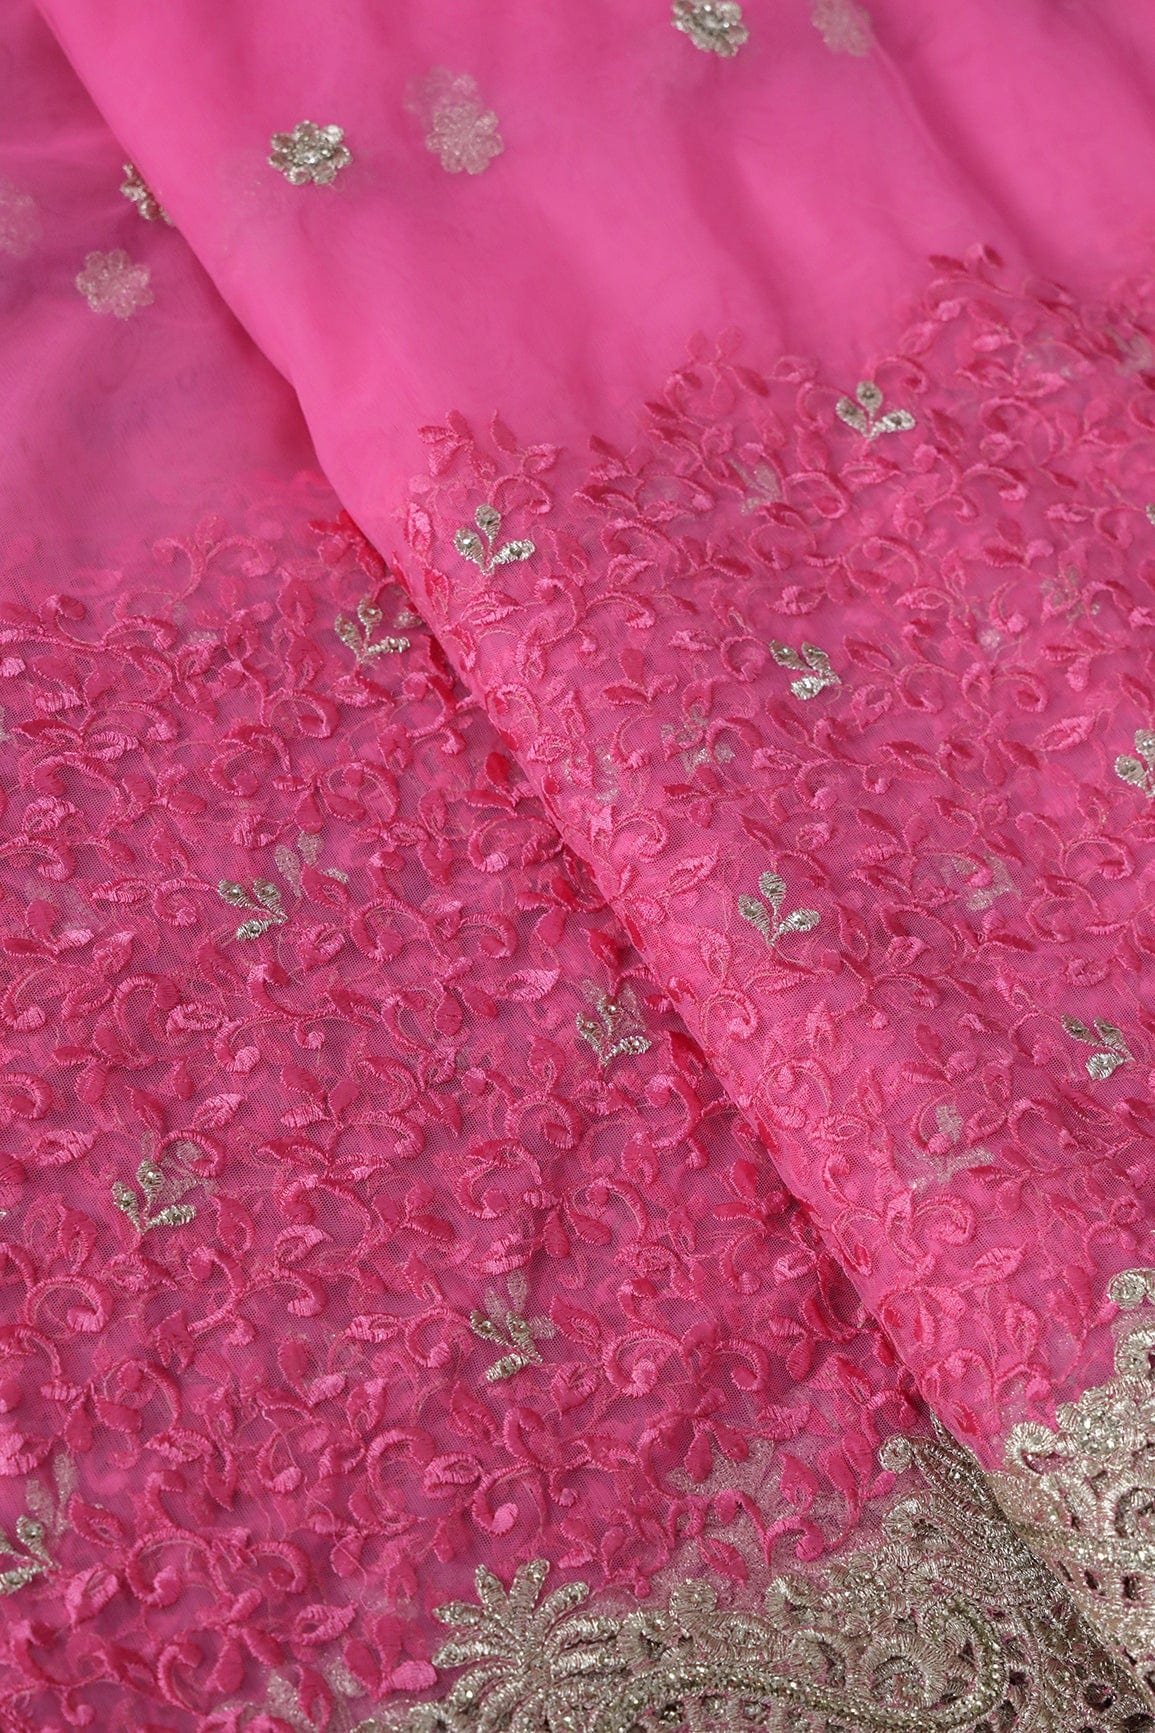 doeraa Embroidery Fabrics Big Width''56'' Pink Thread With Zari Leafy Embroidery Work On Pink Soft Net Fabric With Border